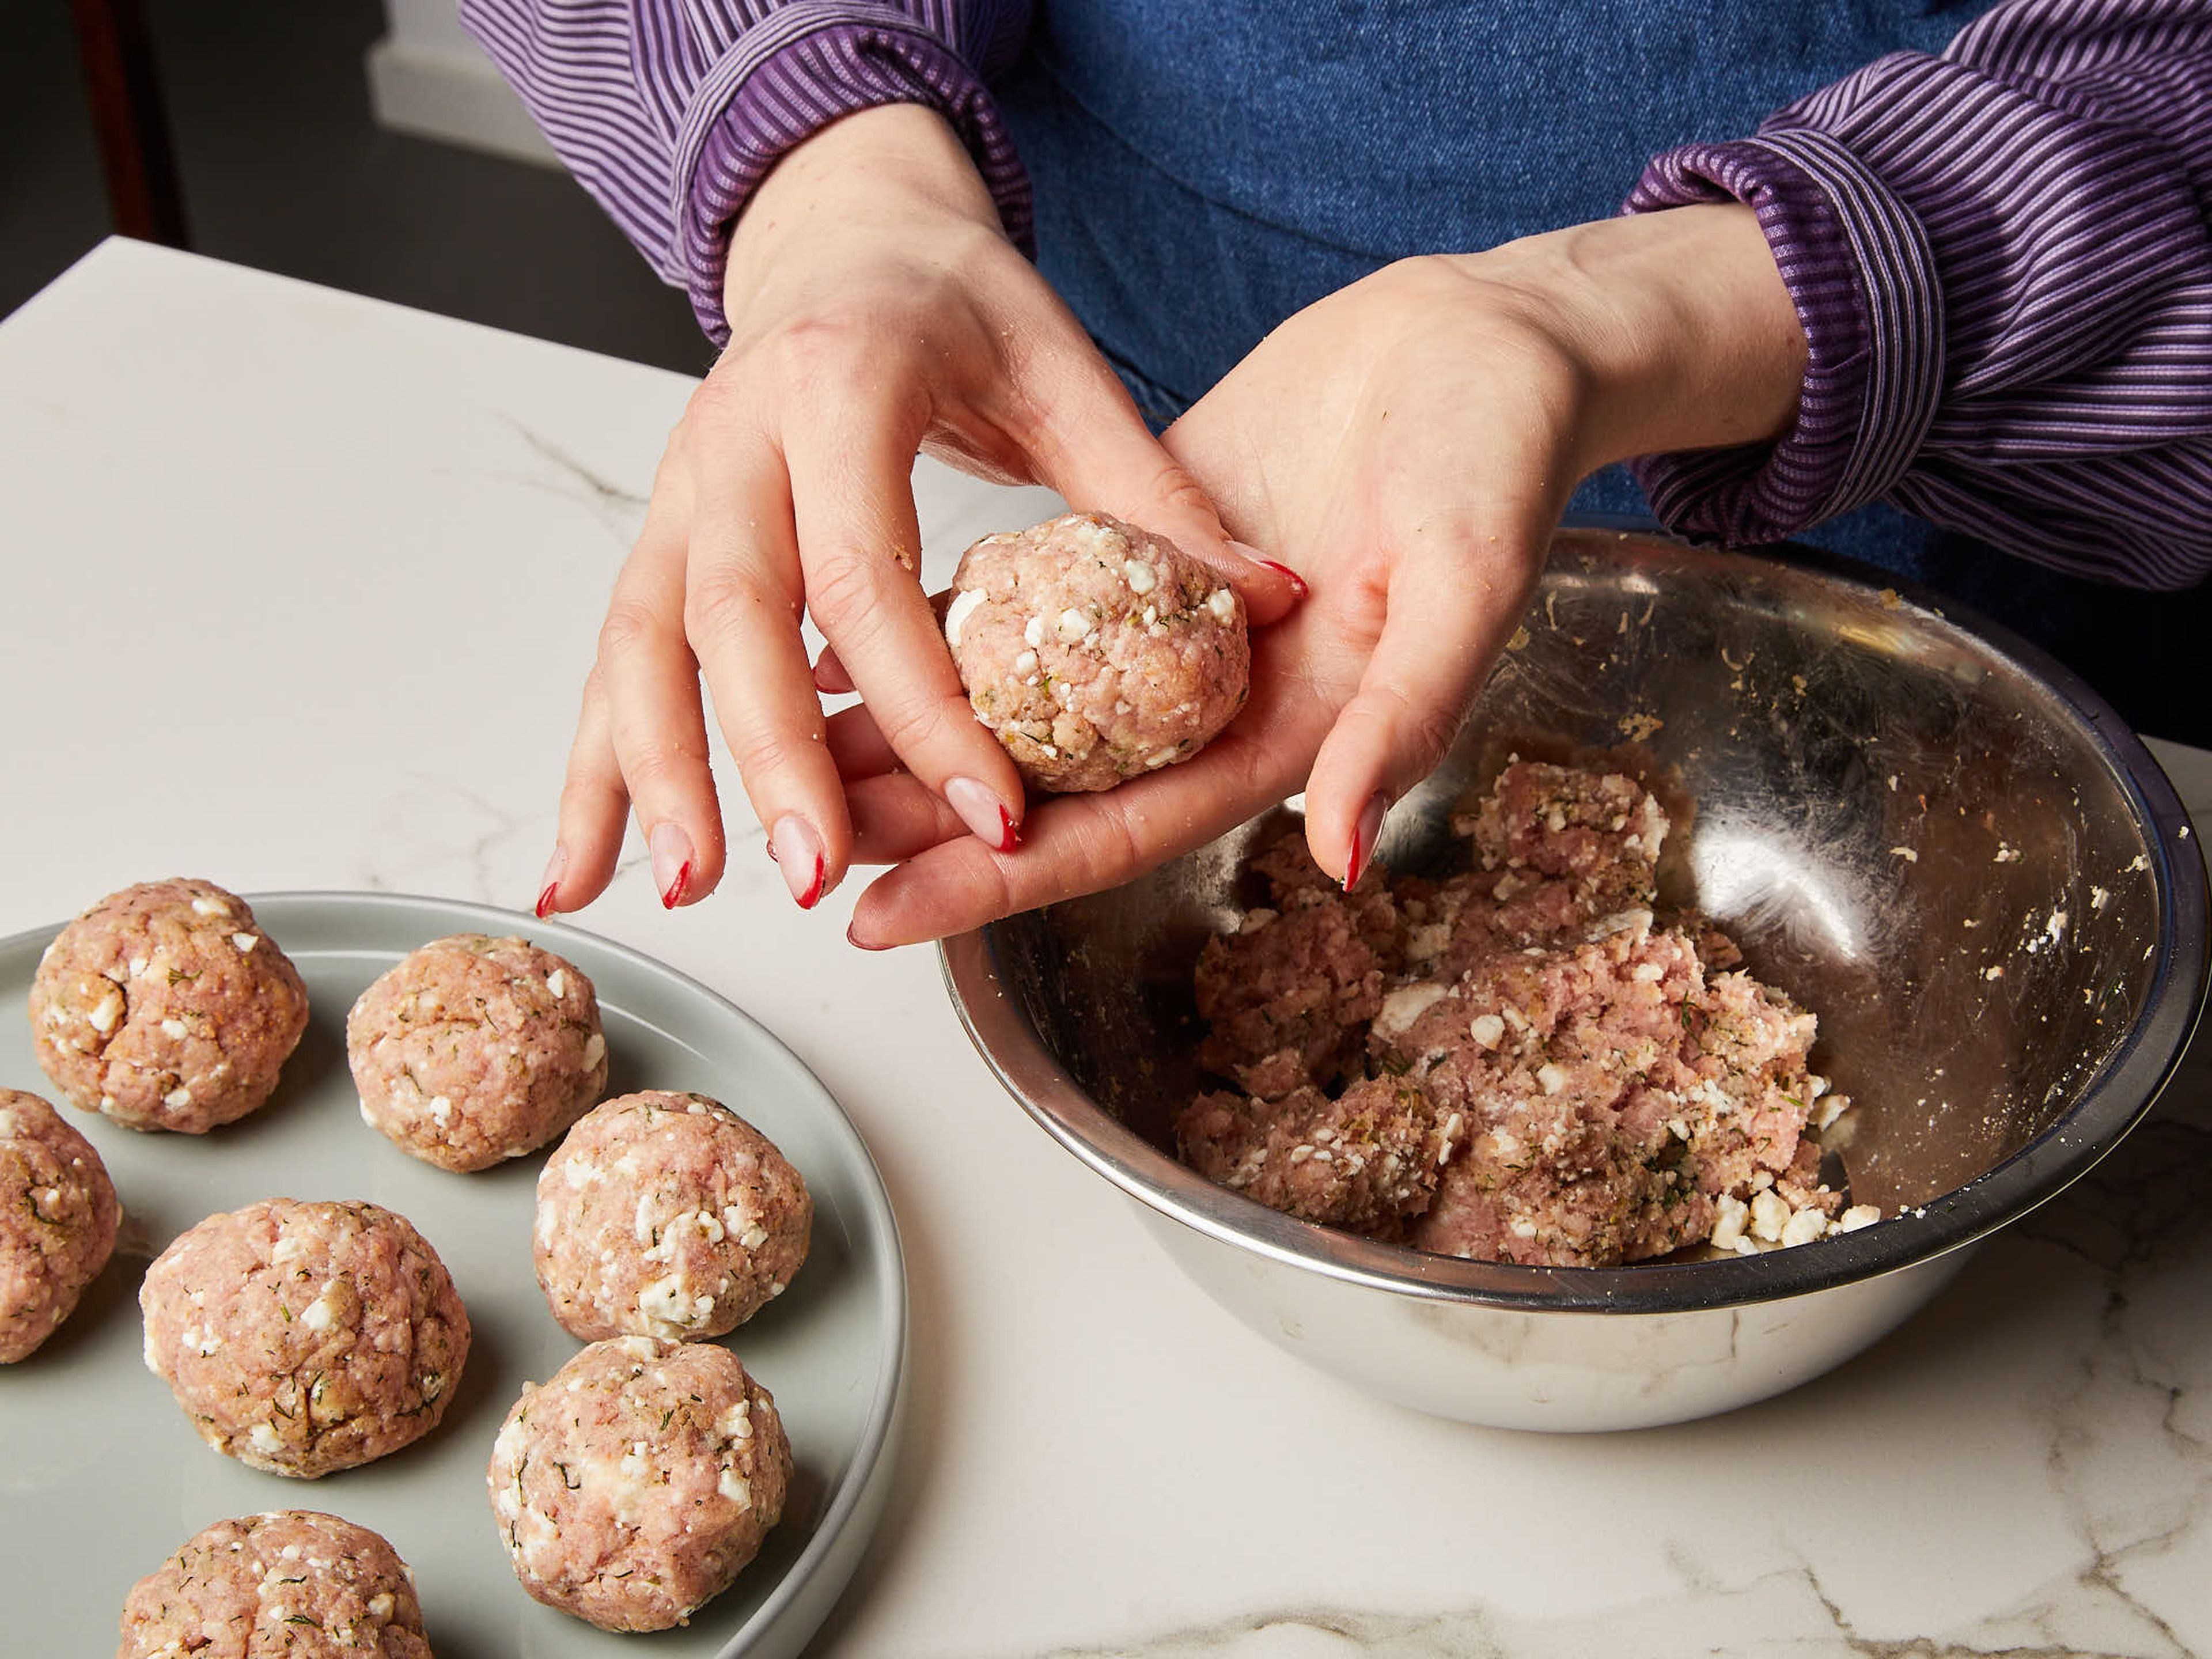 Finely grate garlic and chop dill. Zest and juice half your lemons and set aside. In a bowl, gently mix pork mince, ⅔ of feta, garlic, breadcrumbs, egg, oregano, cumin, ground coriander seeds, ½ of the dill, salt, and pepper. With clean, wet hands, roll mix into approx. golf ball size meatballs.